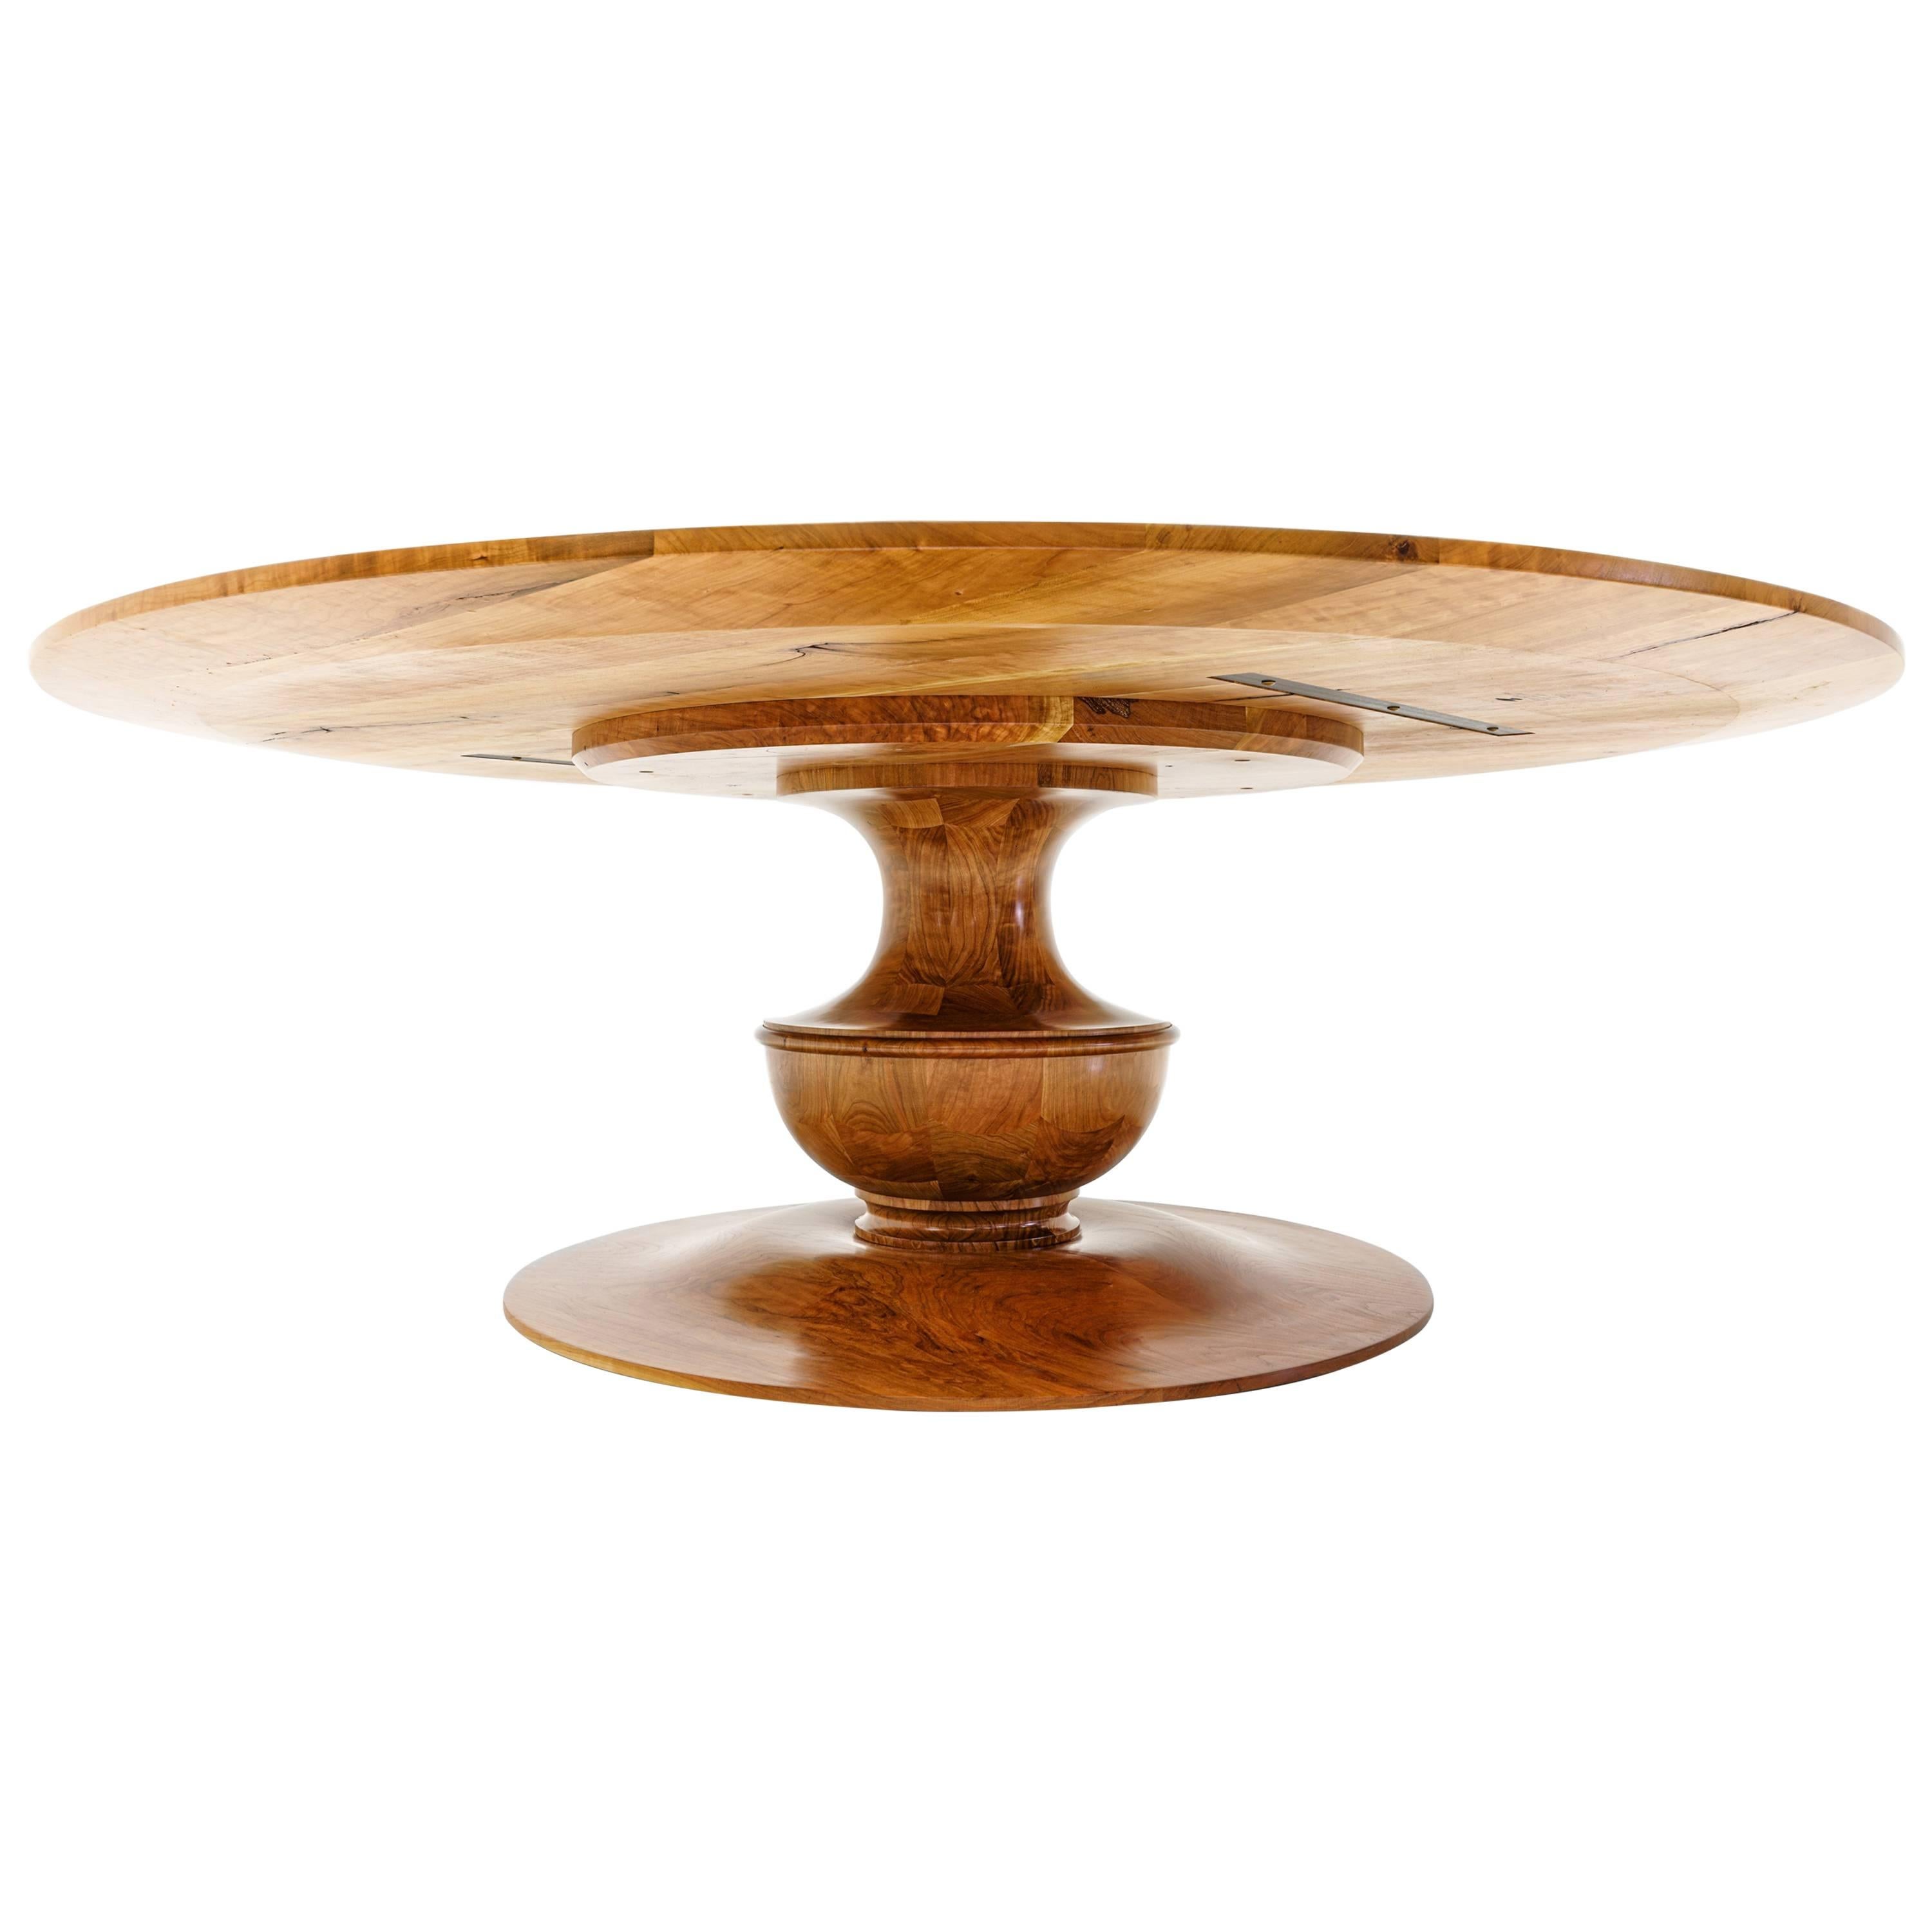 Barolo Table Handmade Cherry Wood Round Top - Foyer, Dining or Conference Room For Sale